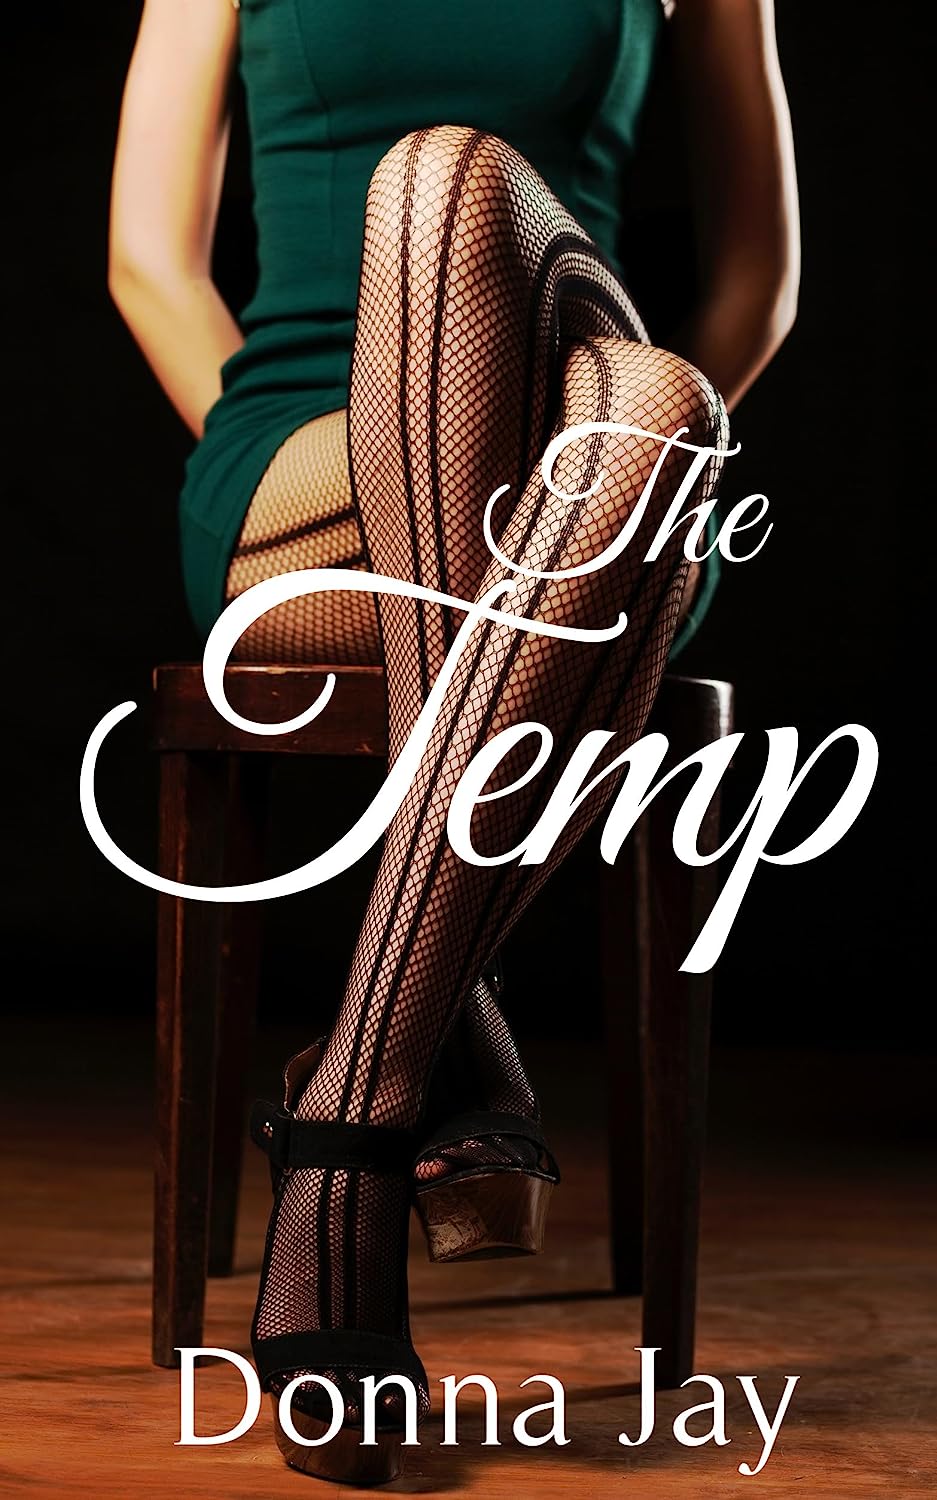 Book Review: The Temp by Donna Jay (romance, lesbian)